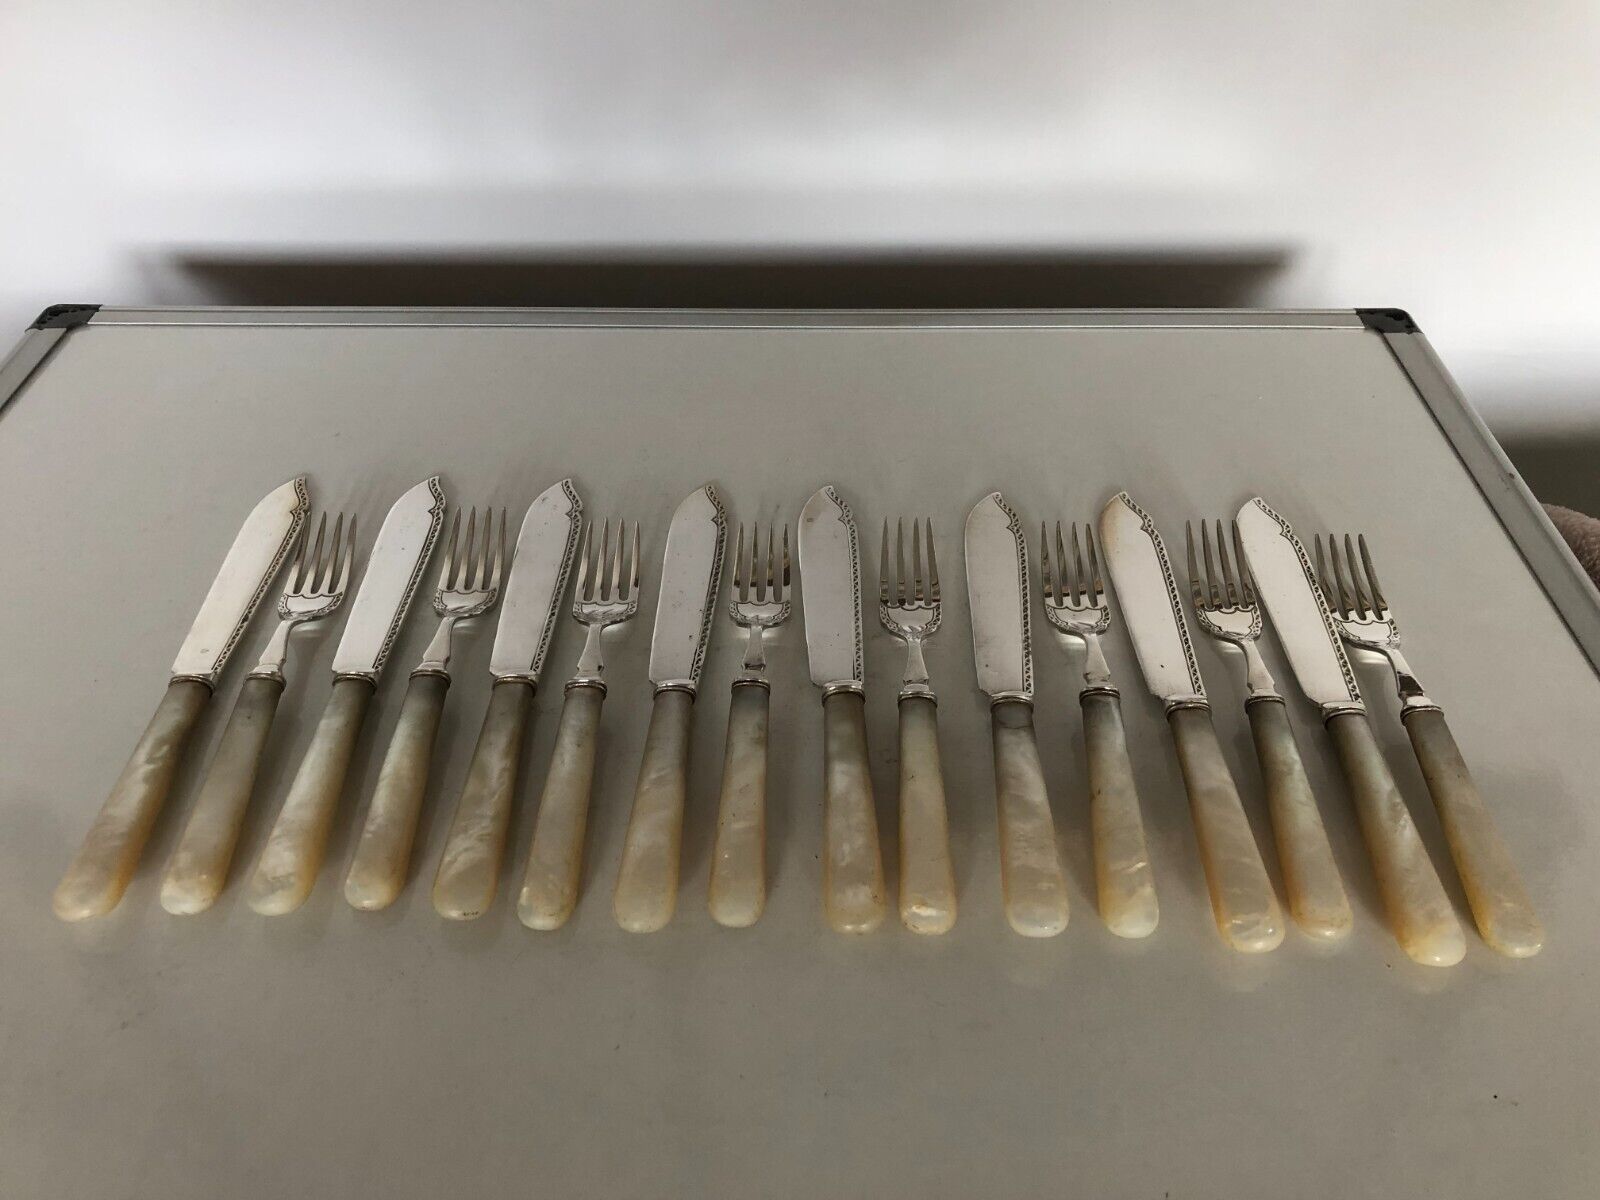 SET OF 8 SILVER PLATED FISH KNIVES & 8 FORKS WITH MOP HANDLES (MOP-76)